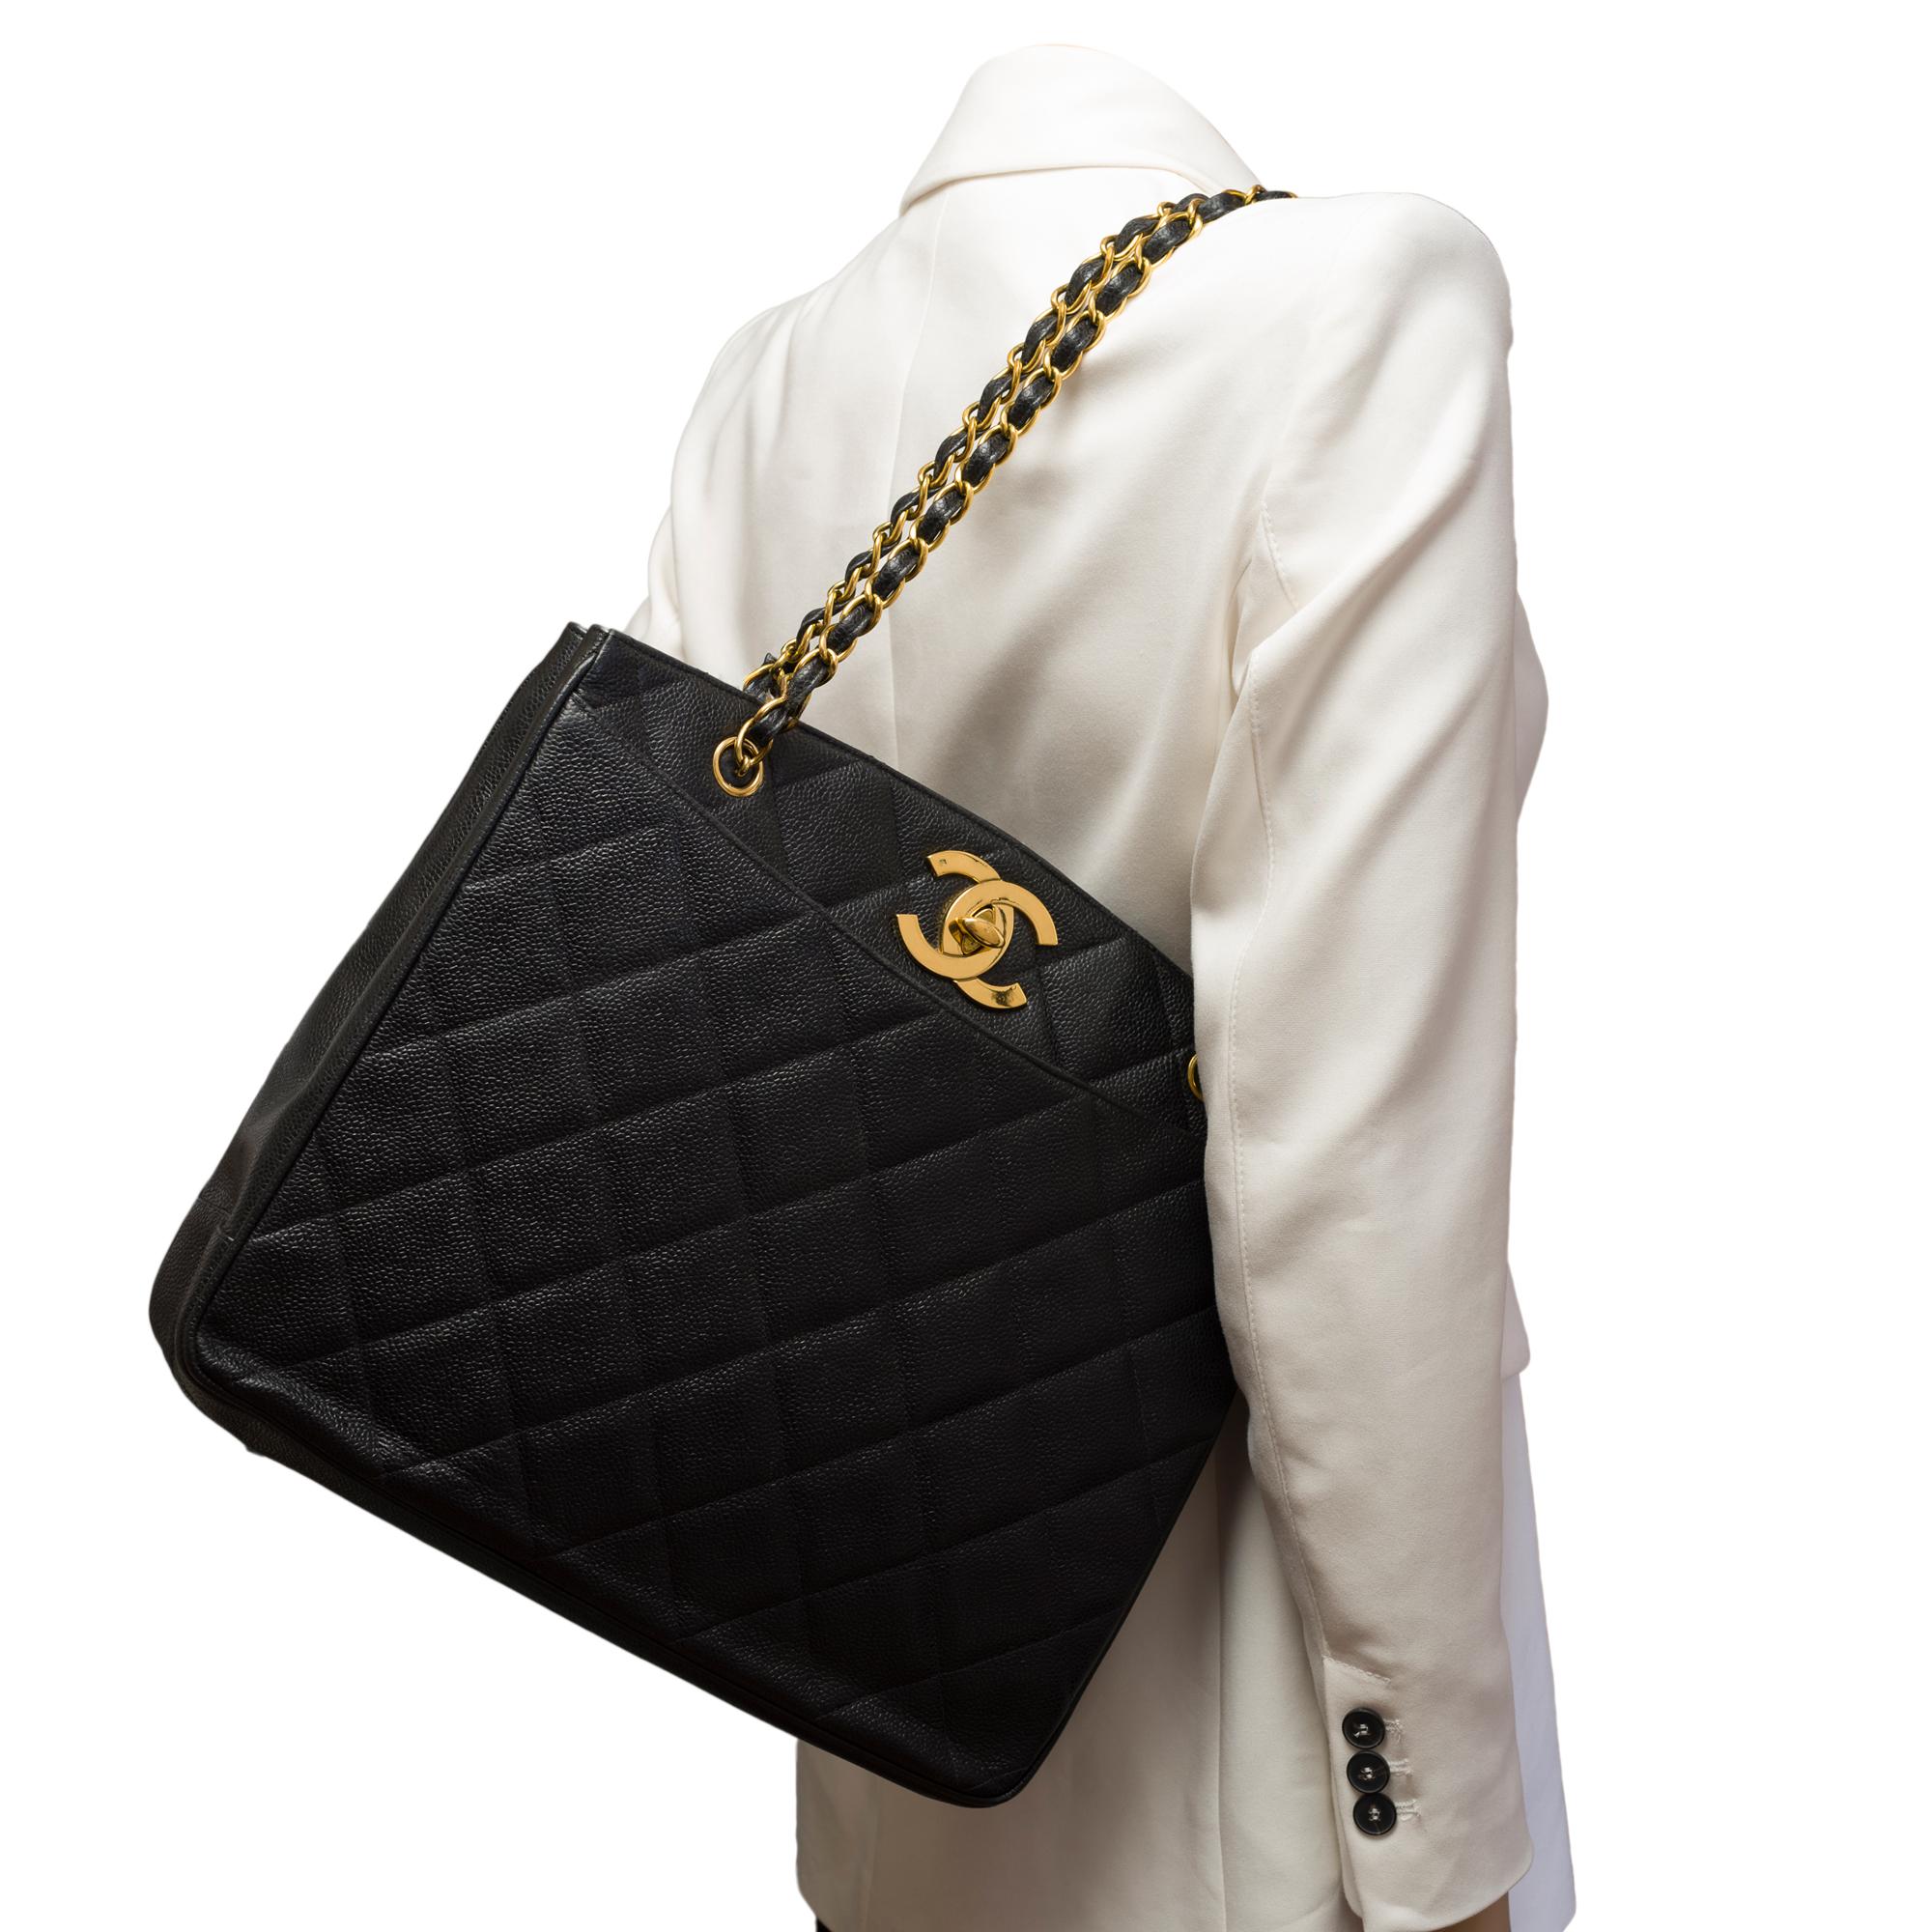 Amazing Chanel Shopping Tote bag in black Caviar quilted leather, GHW 8